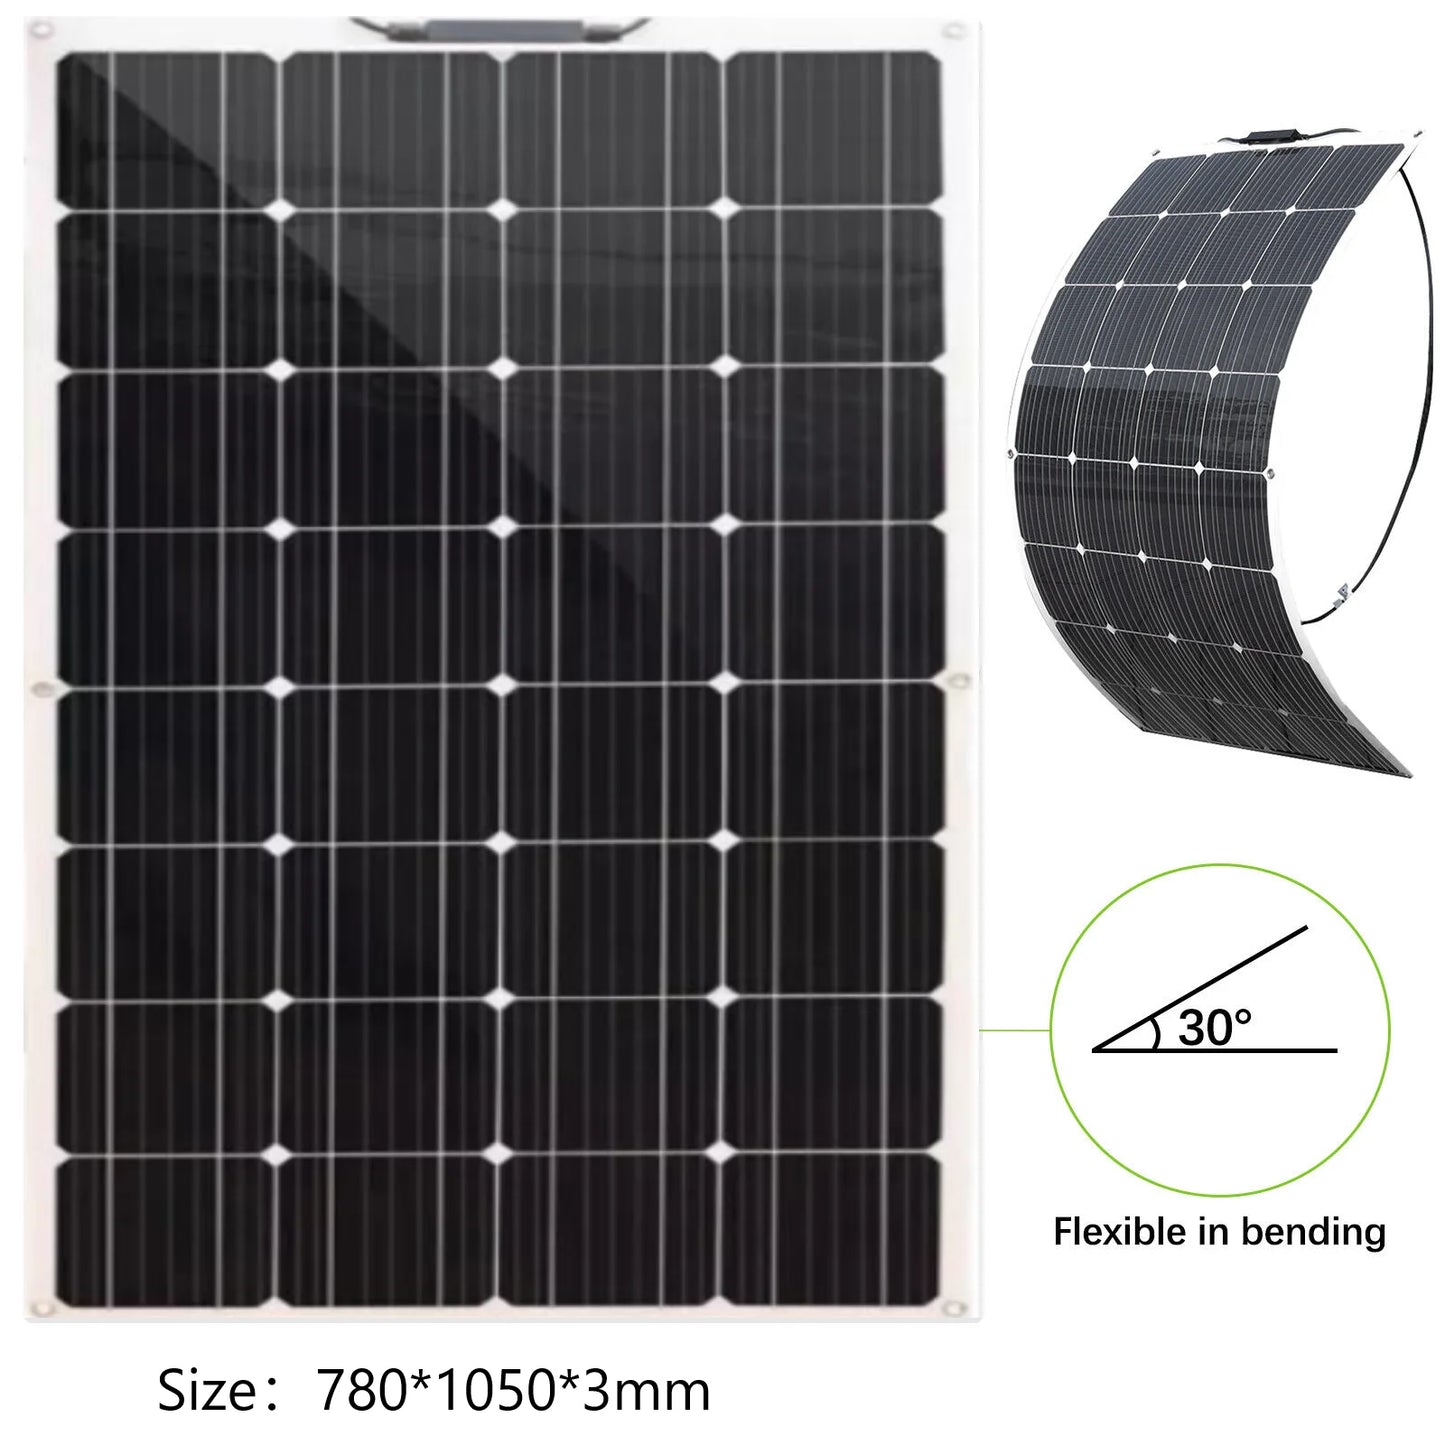 150W Flexible Solar Panel With 15A MPPT Controller IP65 Waterproof Solar Panel Kit Complete 12V/18V Photovoltaic Camping RV Boat